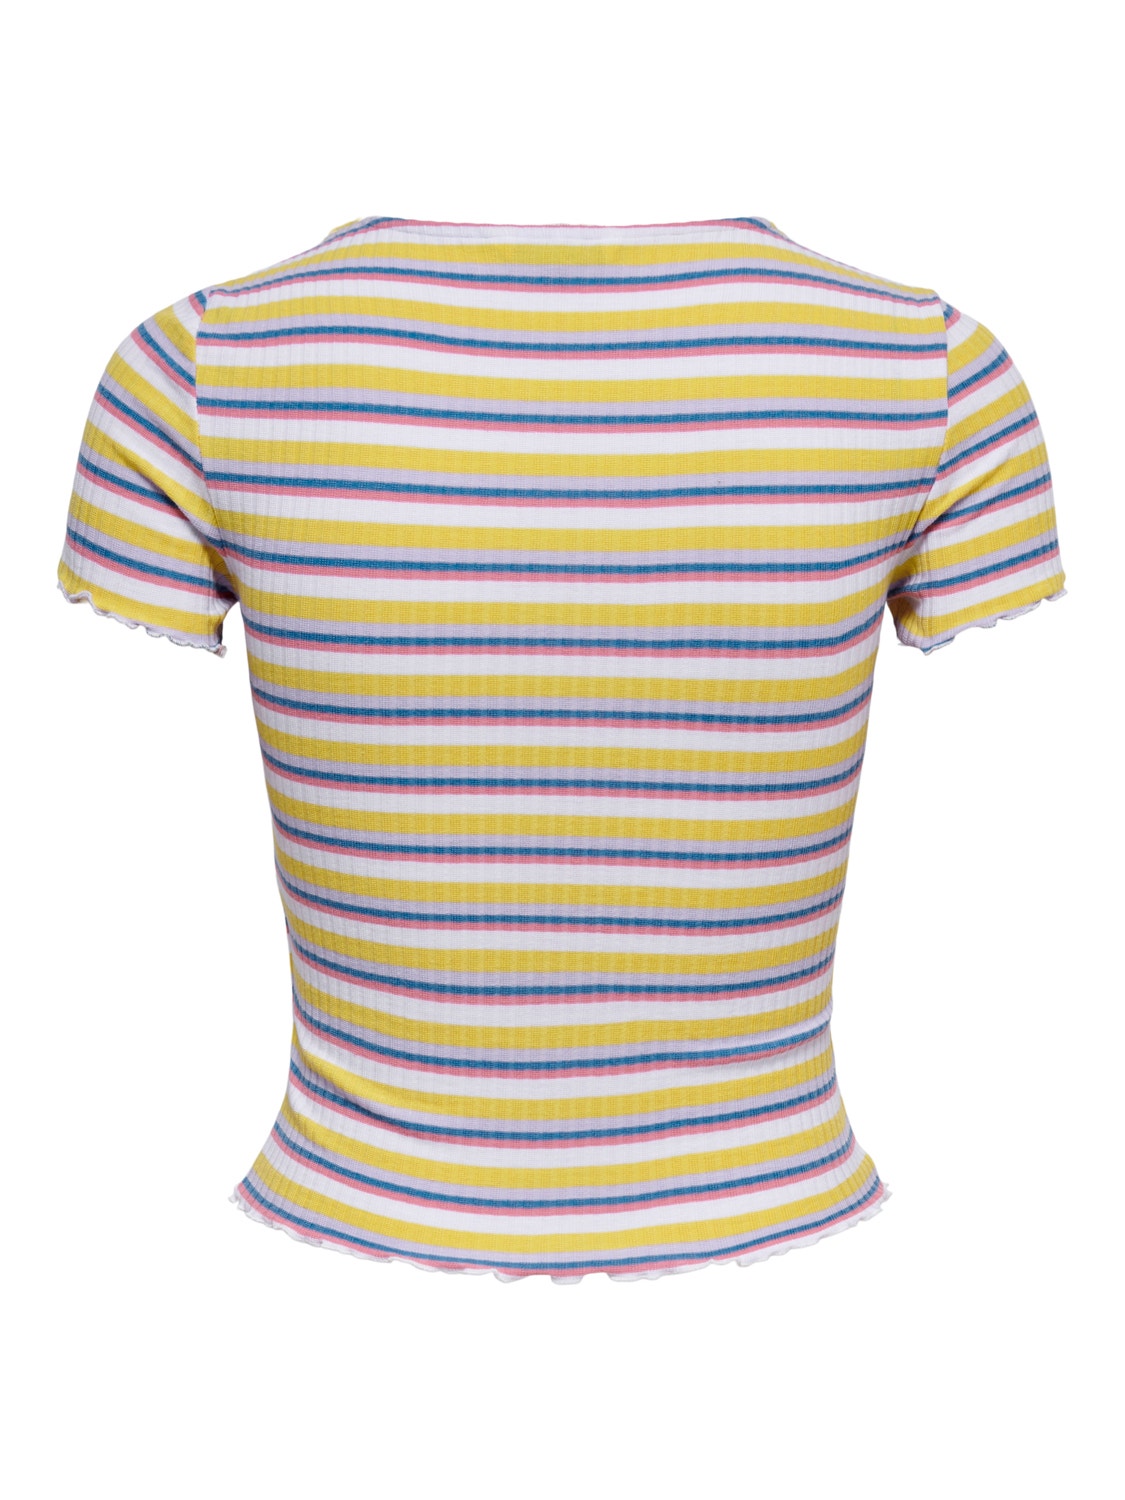 ONLY Gestreept Top -Goldfinch - 15230515